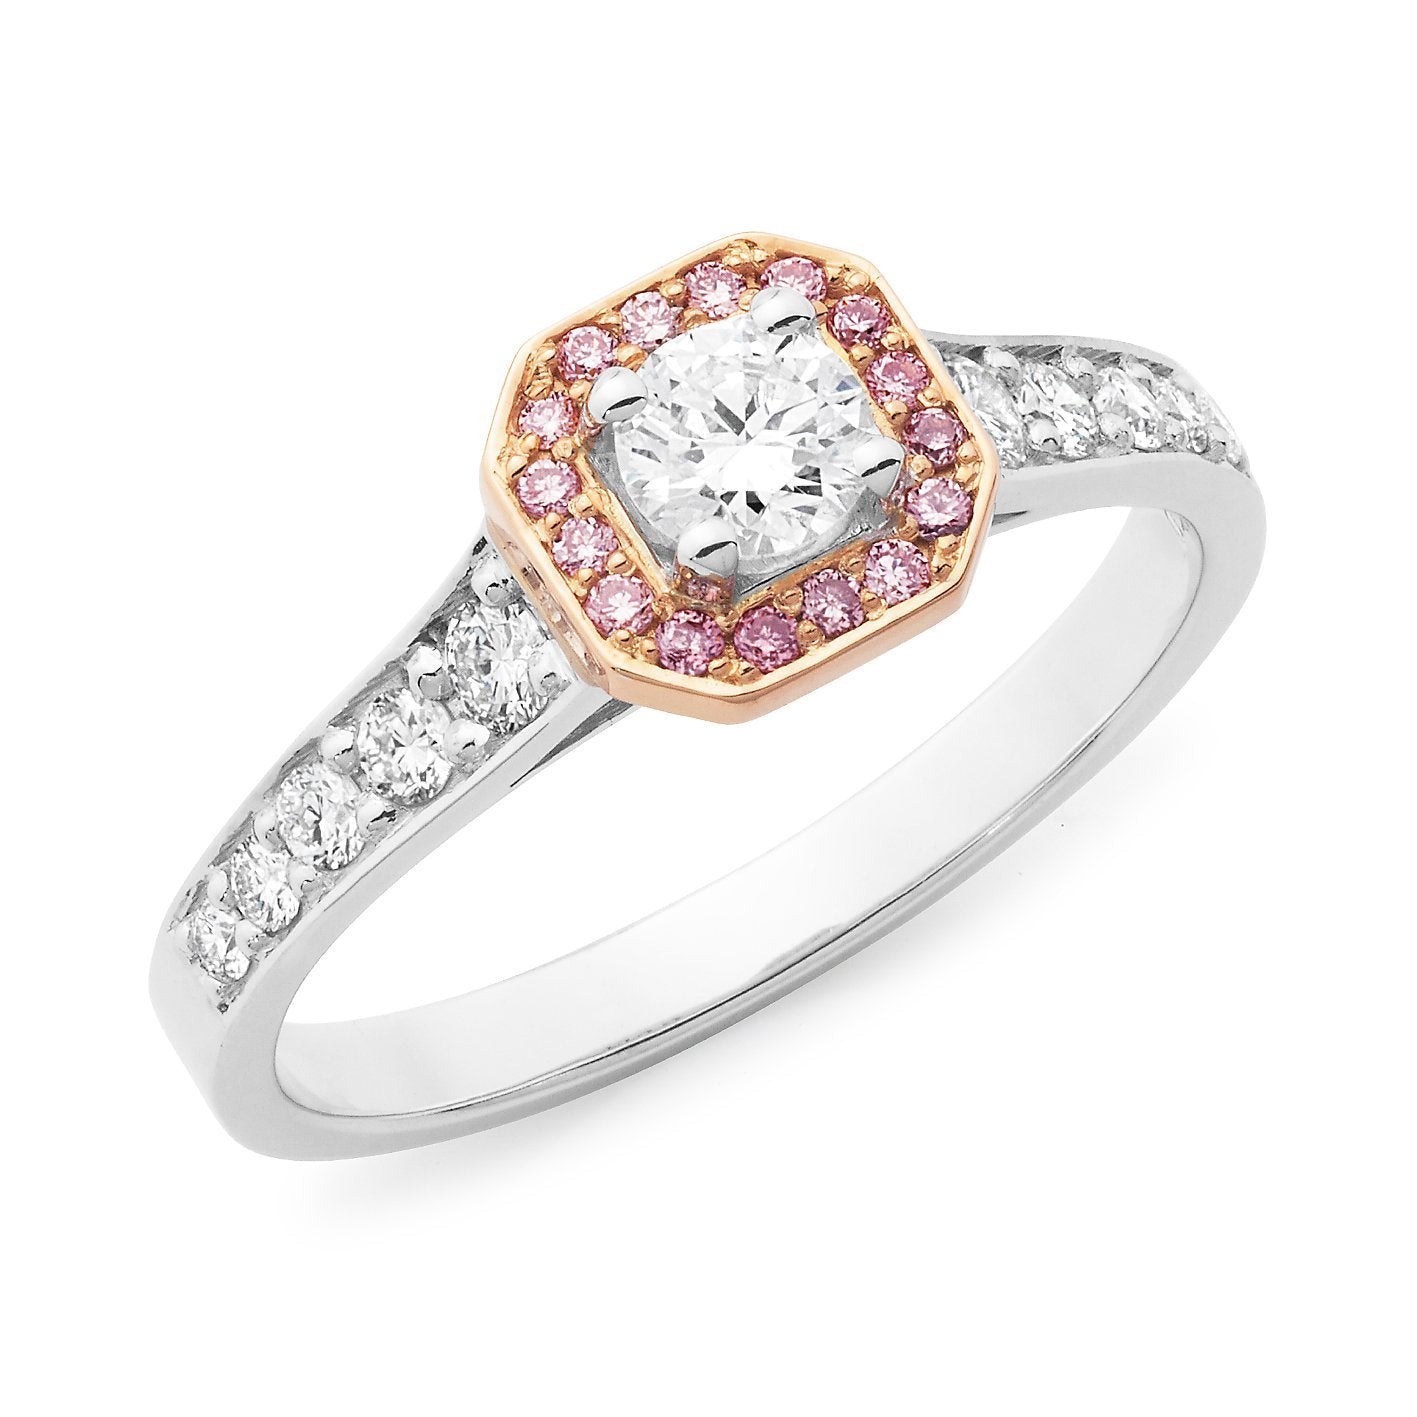 PINK CAVIAR 0.60ct White Round Brilliant & Pink Diamond Engagement Ring in 18ct White Gold